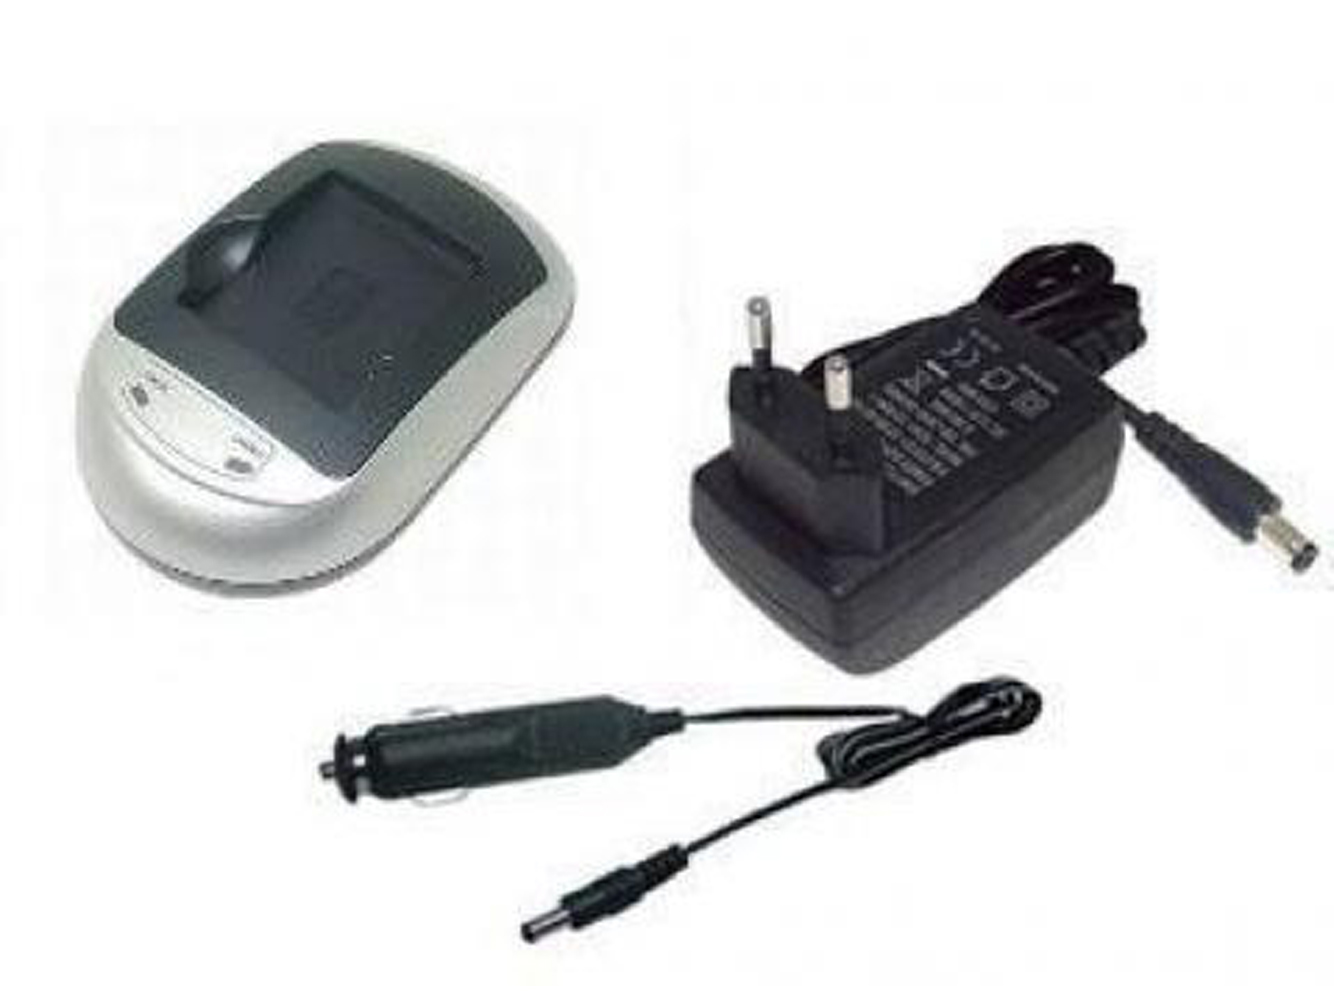 Casio Slb-1137c Battery Chargers For Casio Exilim Zoom Ex-z22 replacement